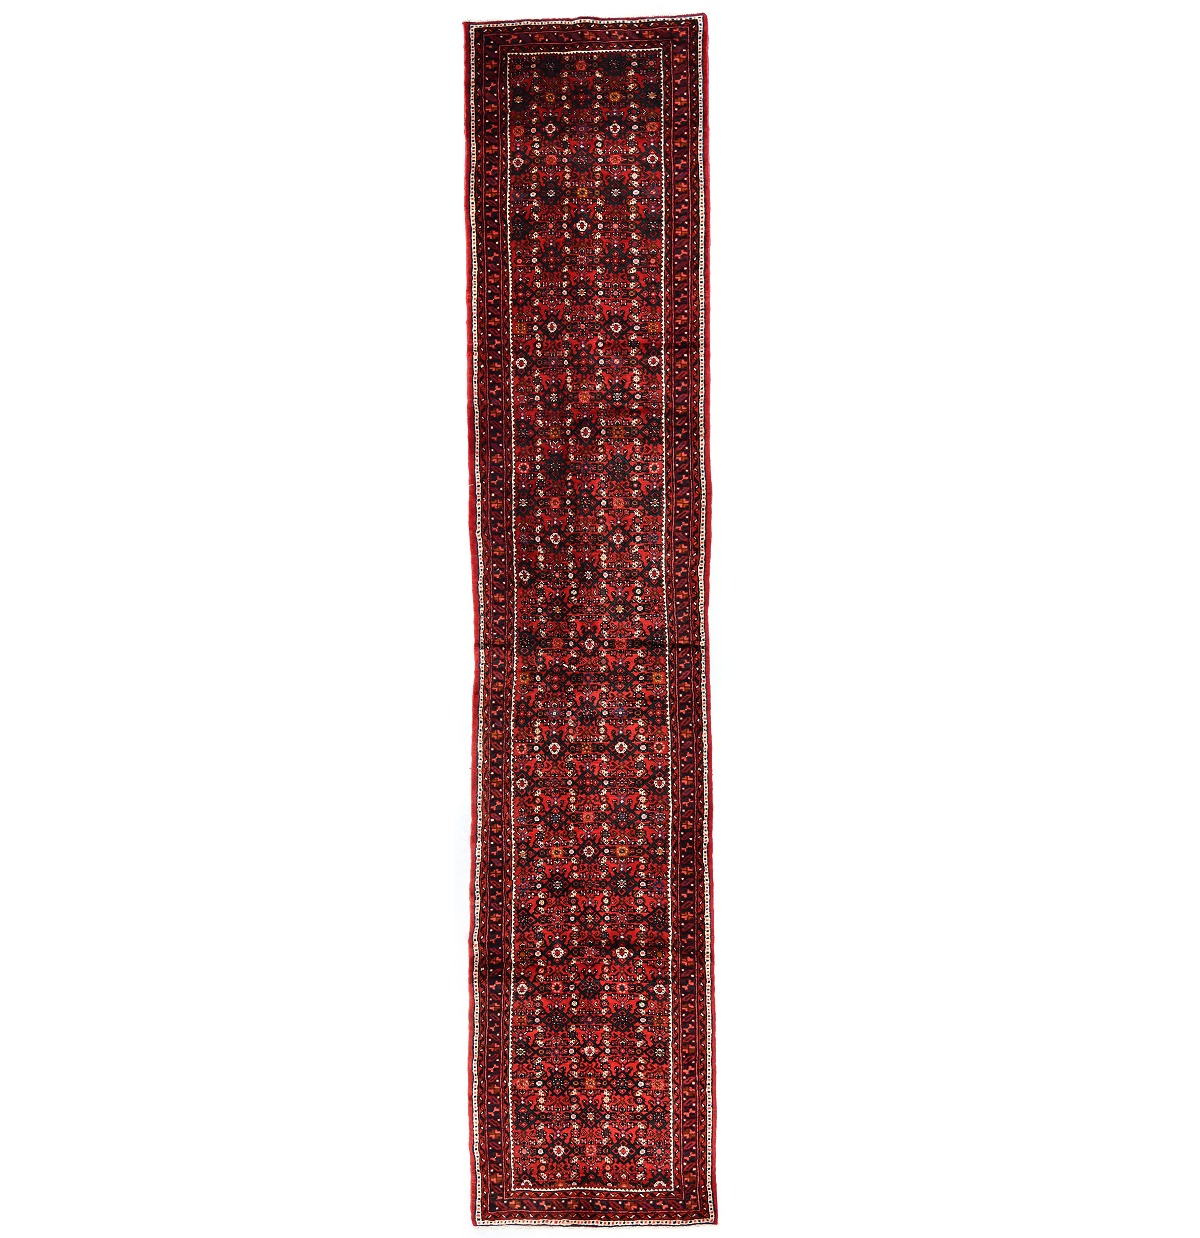 Vintage Red Tribal 3X14 Hossainabad Persian Runner Rug